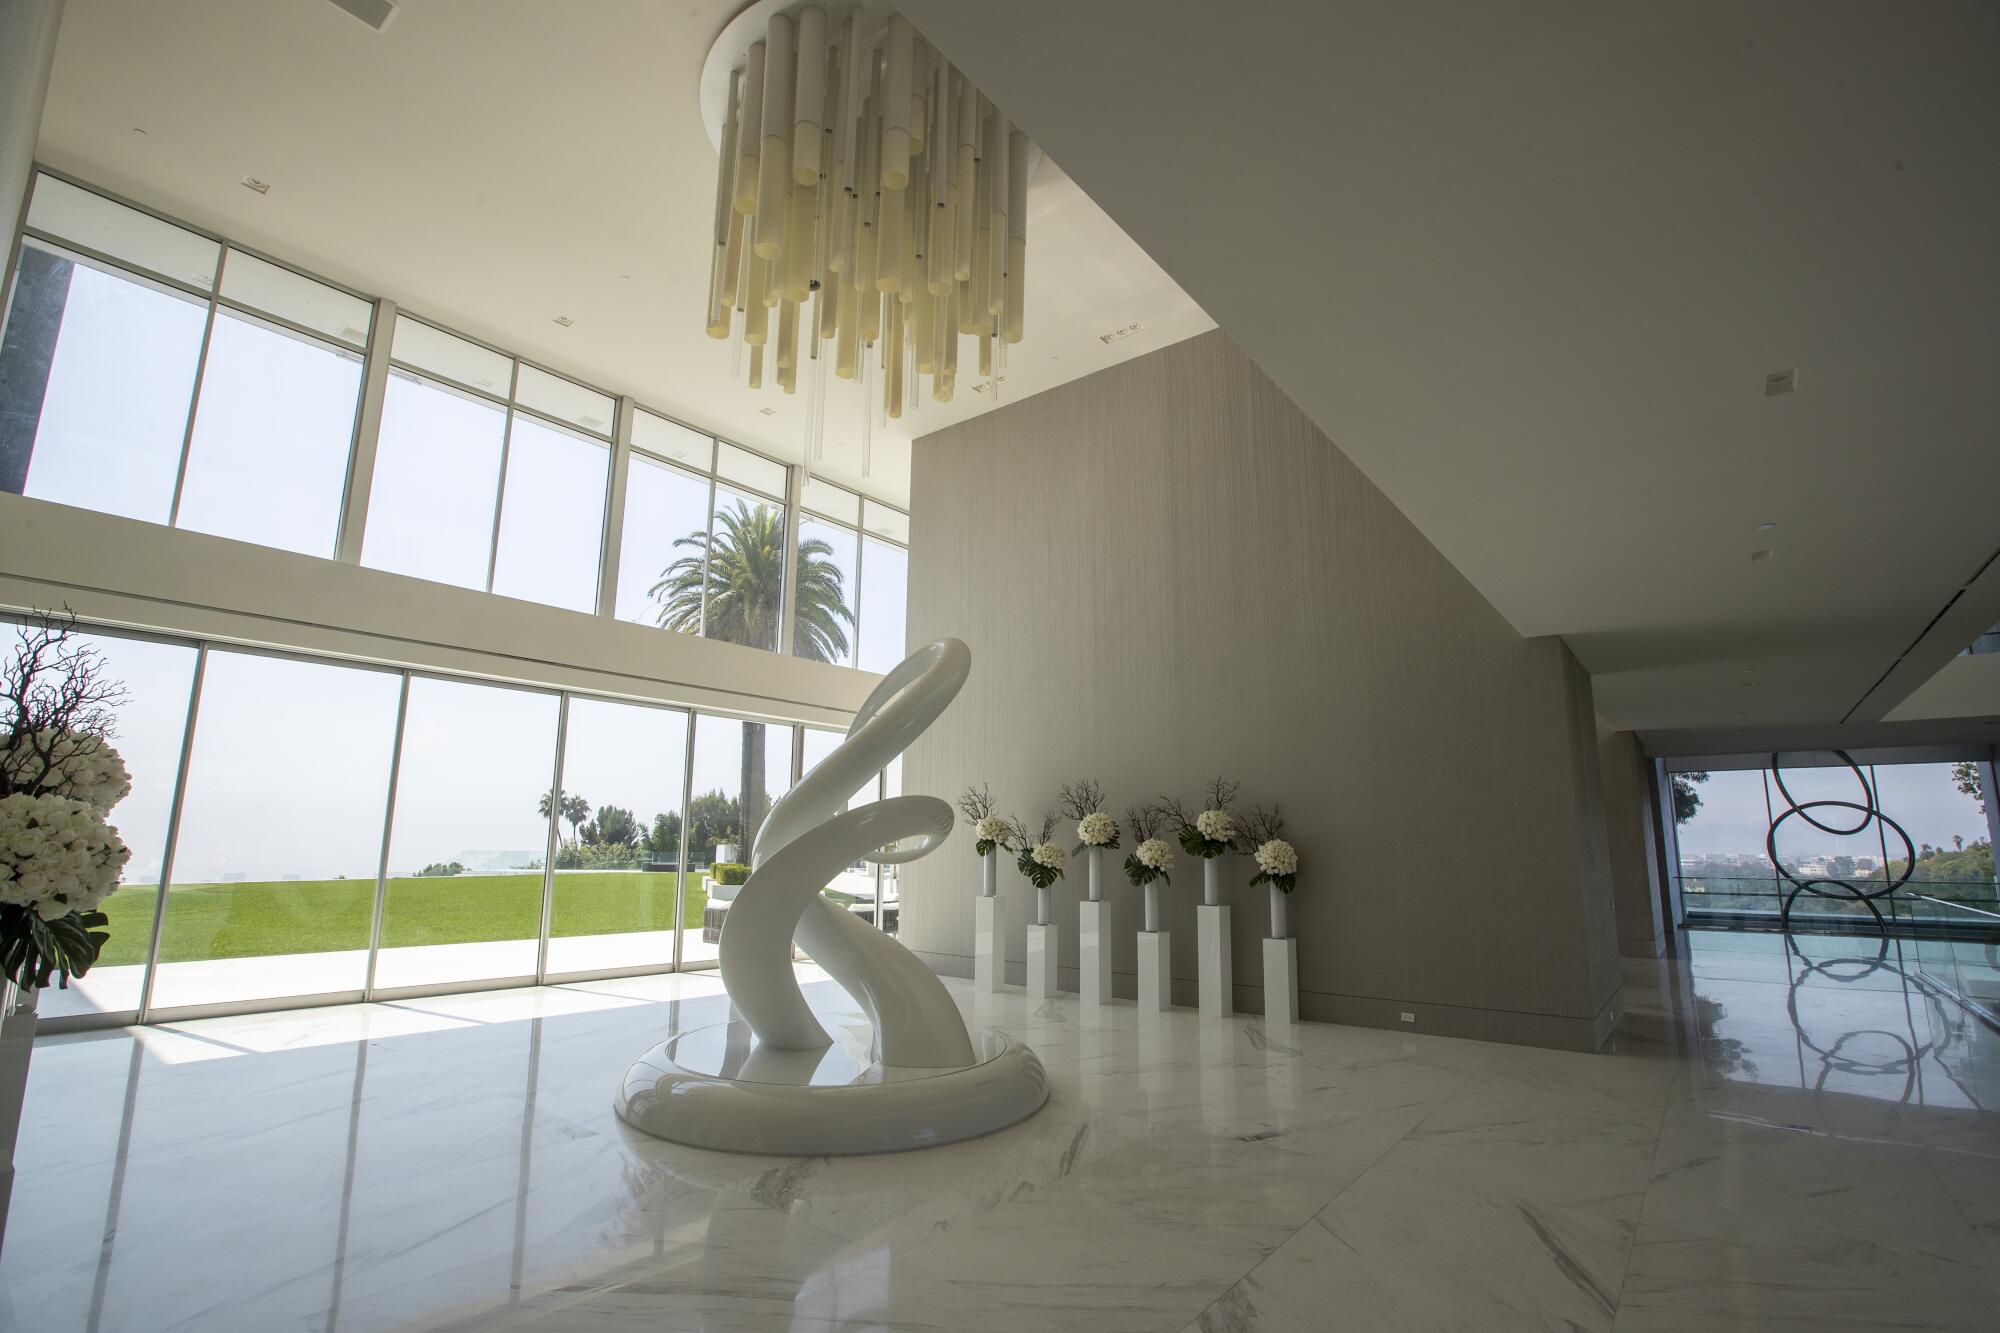 A view of "Unity," an 11-foot-tall sculpture in the foyer of The One.